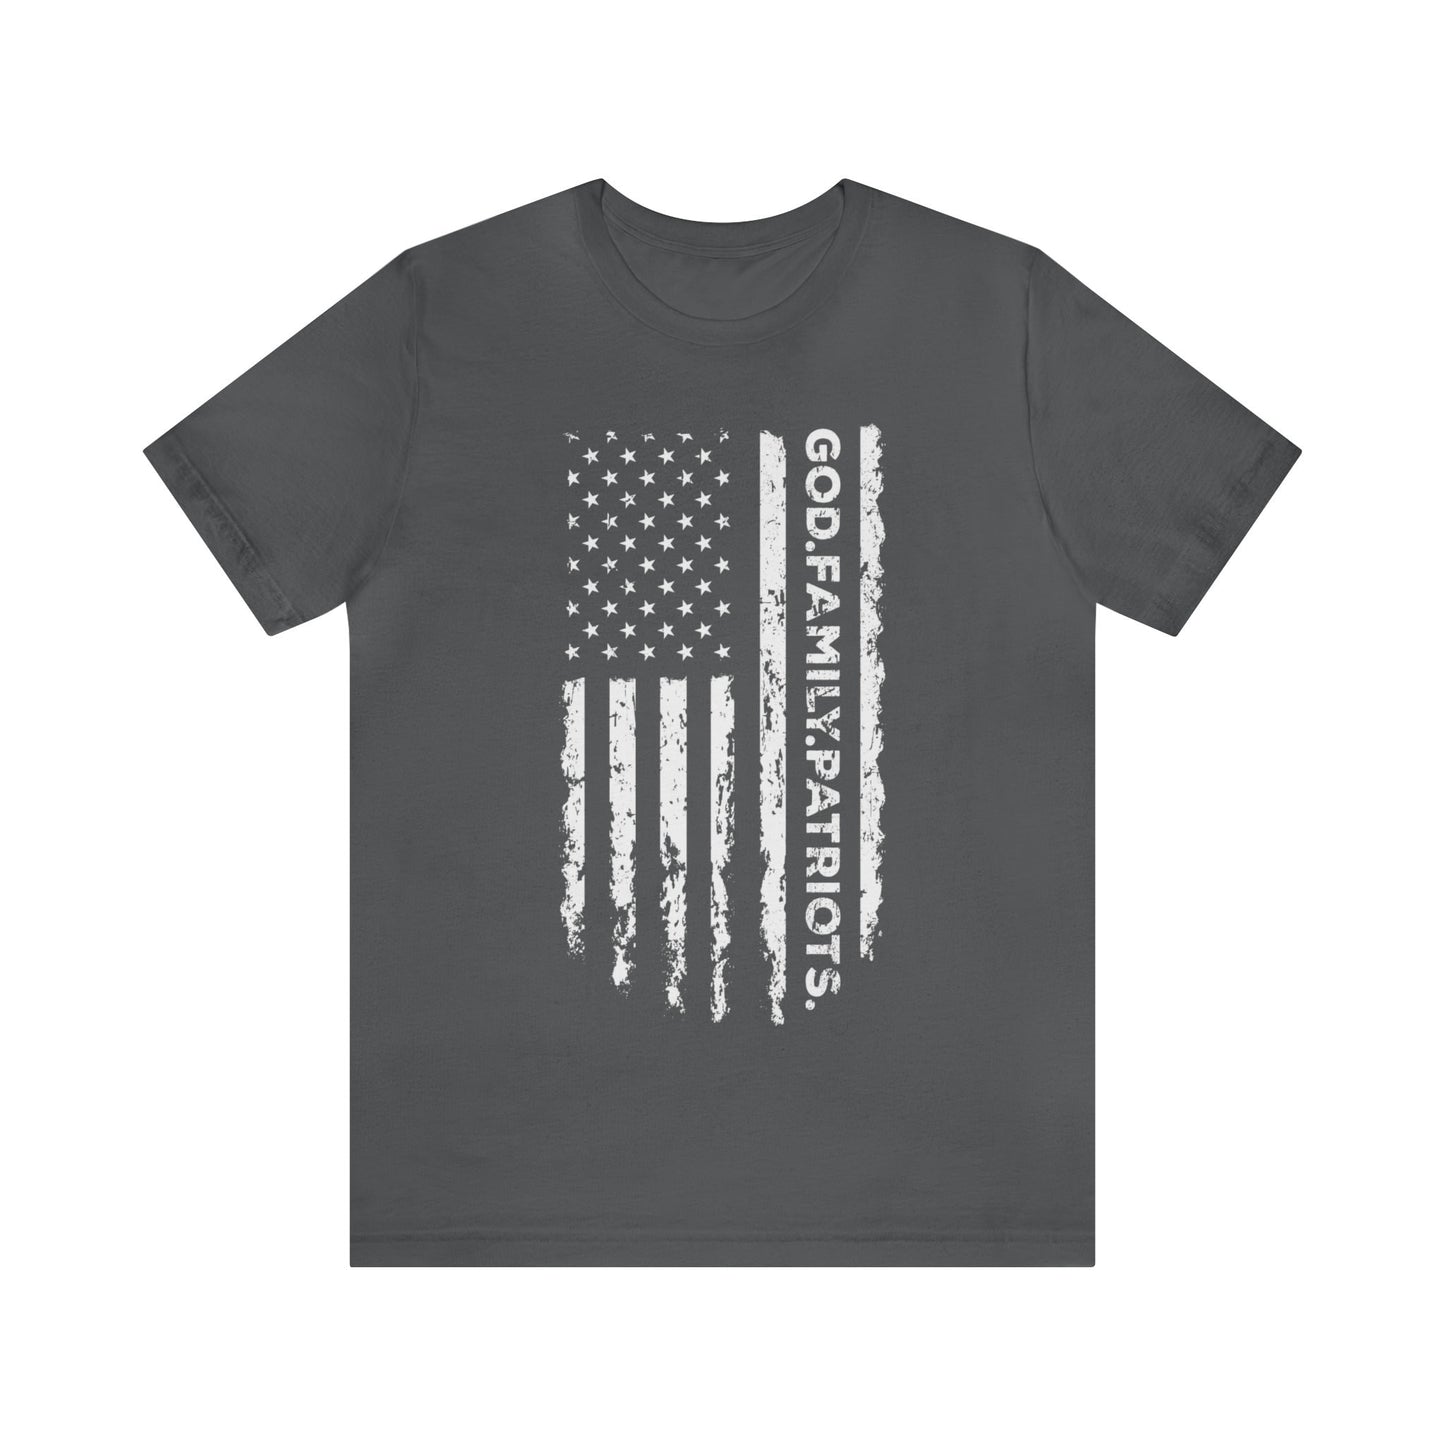 Patriotic gift t-shirt for all who are proud of our brave soldiers and troops